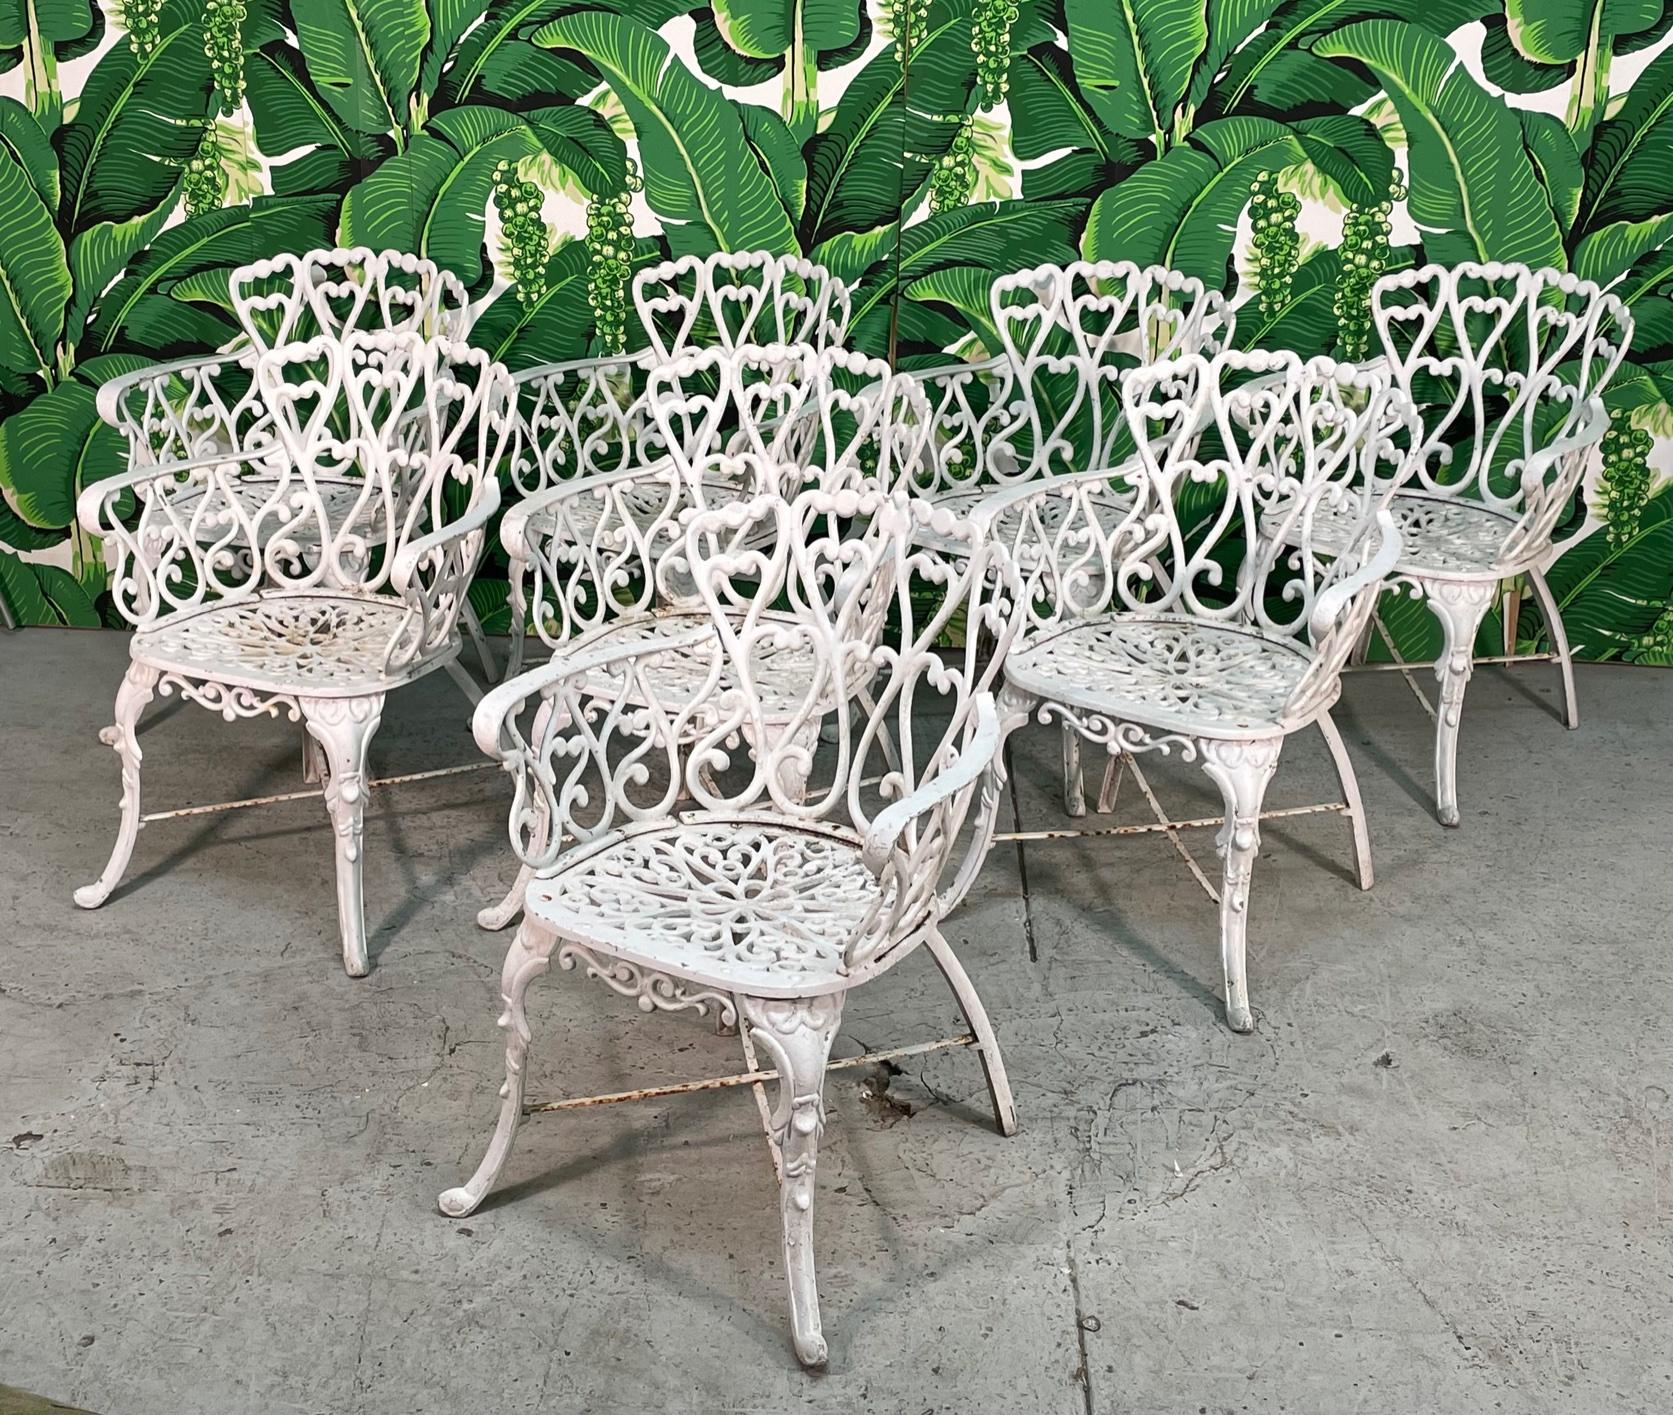 Large set of 8 cast aluminum garden/patio arm chairs in the manner of Frances Elkins. This design was created by Howitt Barry and his son Jack in Birmingham, Alabama in 1960. They were produced under the brand name 